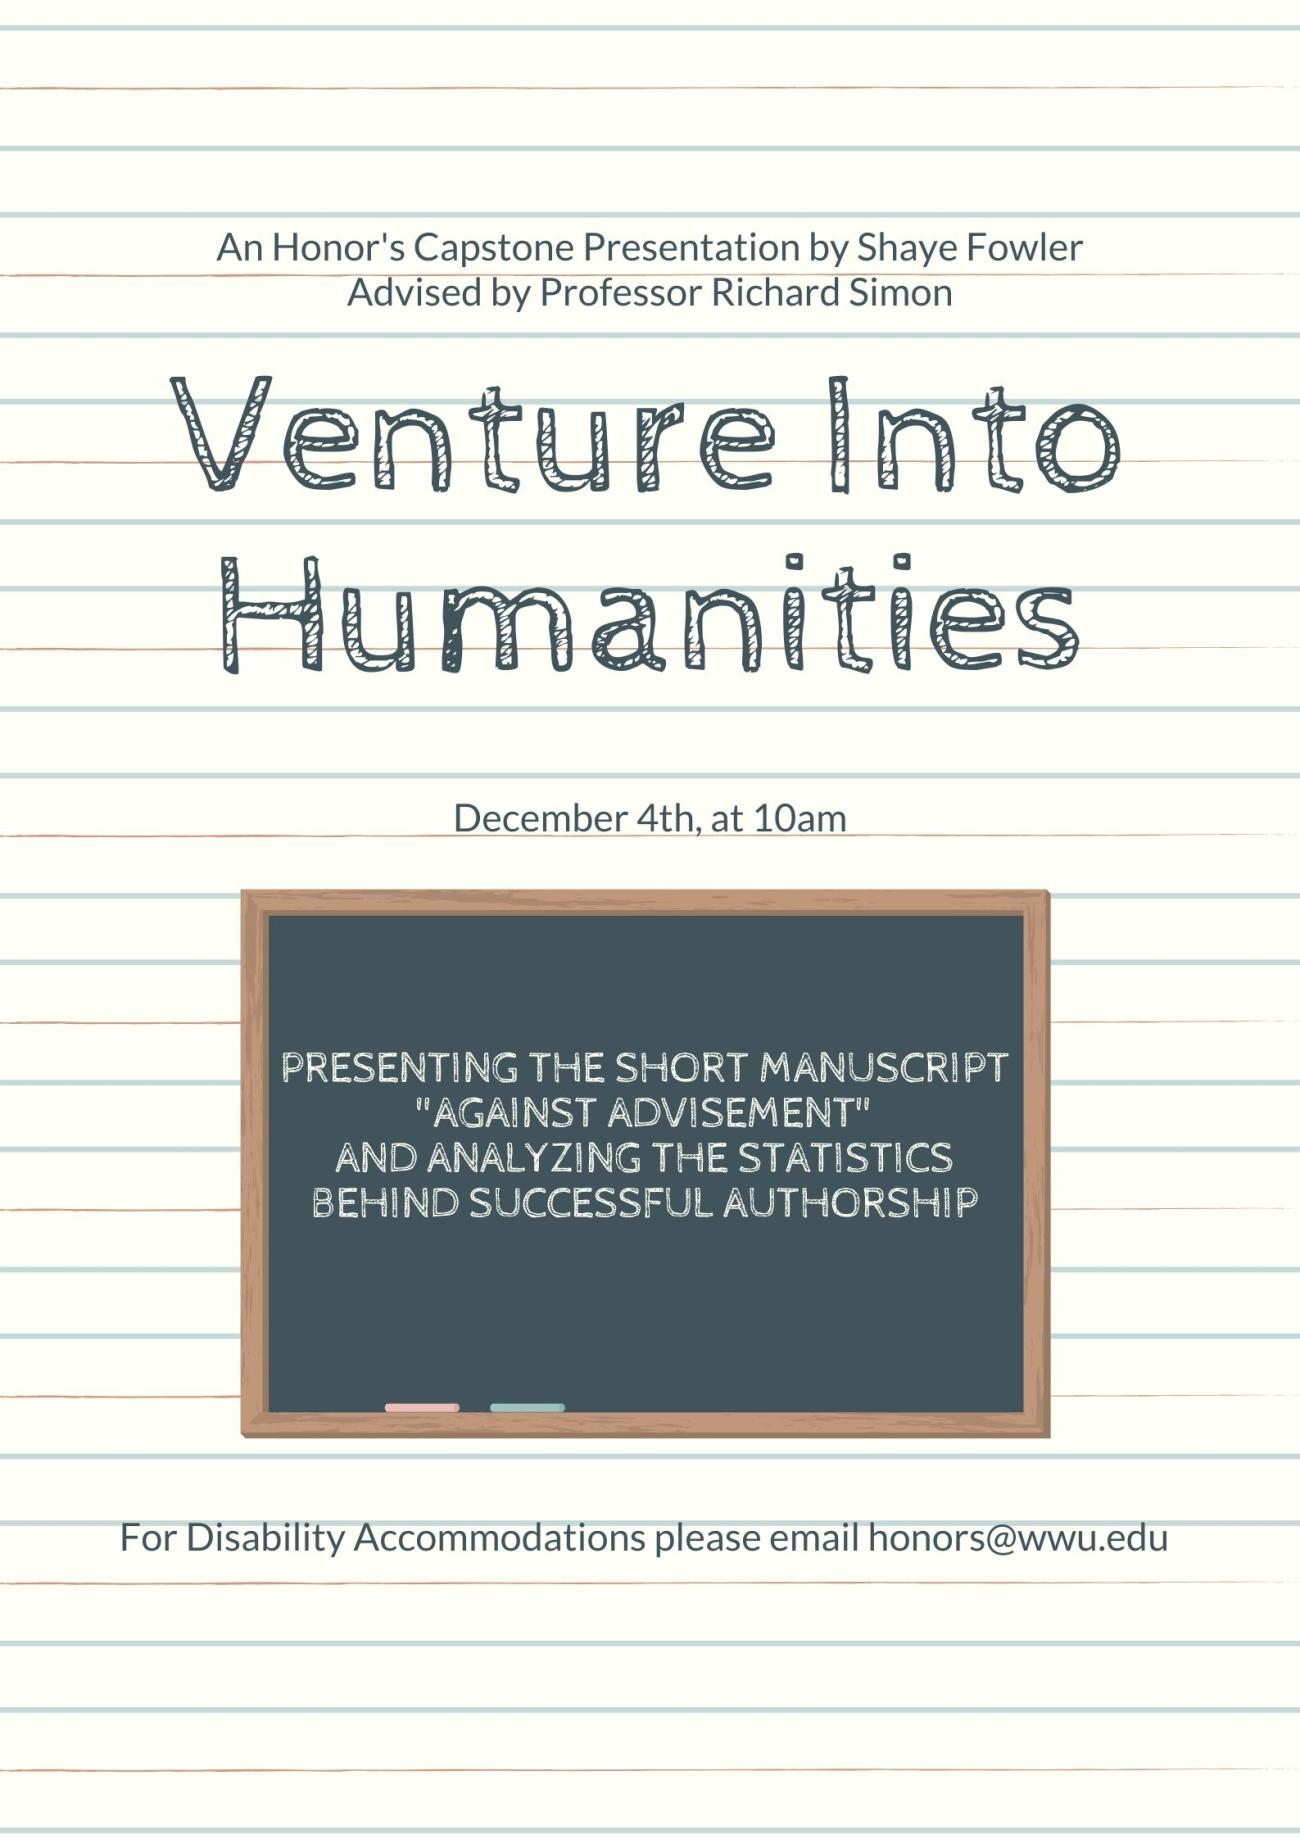 Image: White background with green and red horizontal lines running across the poster, resembling a piece of notebook paper. At the center, a blackboard with two pieces of chalk displays the text. Text: "An Honor’s Capstone Presentation by Shaye Fowler, Advised by Richard Simon. Venture into Humanities. December 4th, at 10am. Presenting the short manuscript 'Against Advisement' and Analyzing the Statistics Behind Successful Authorship. For Disability Accommodations please email honors@wwu.edu"